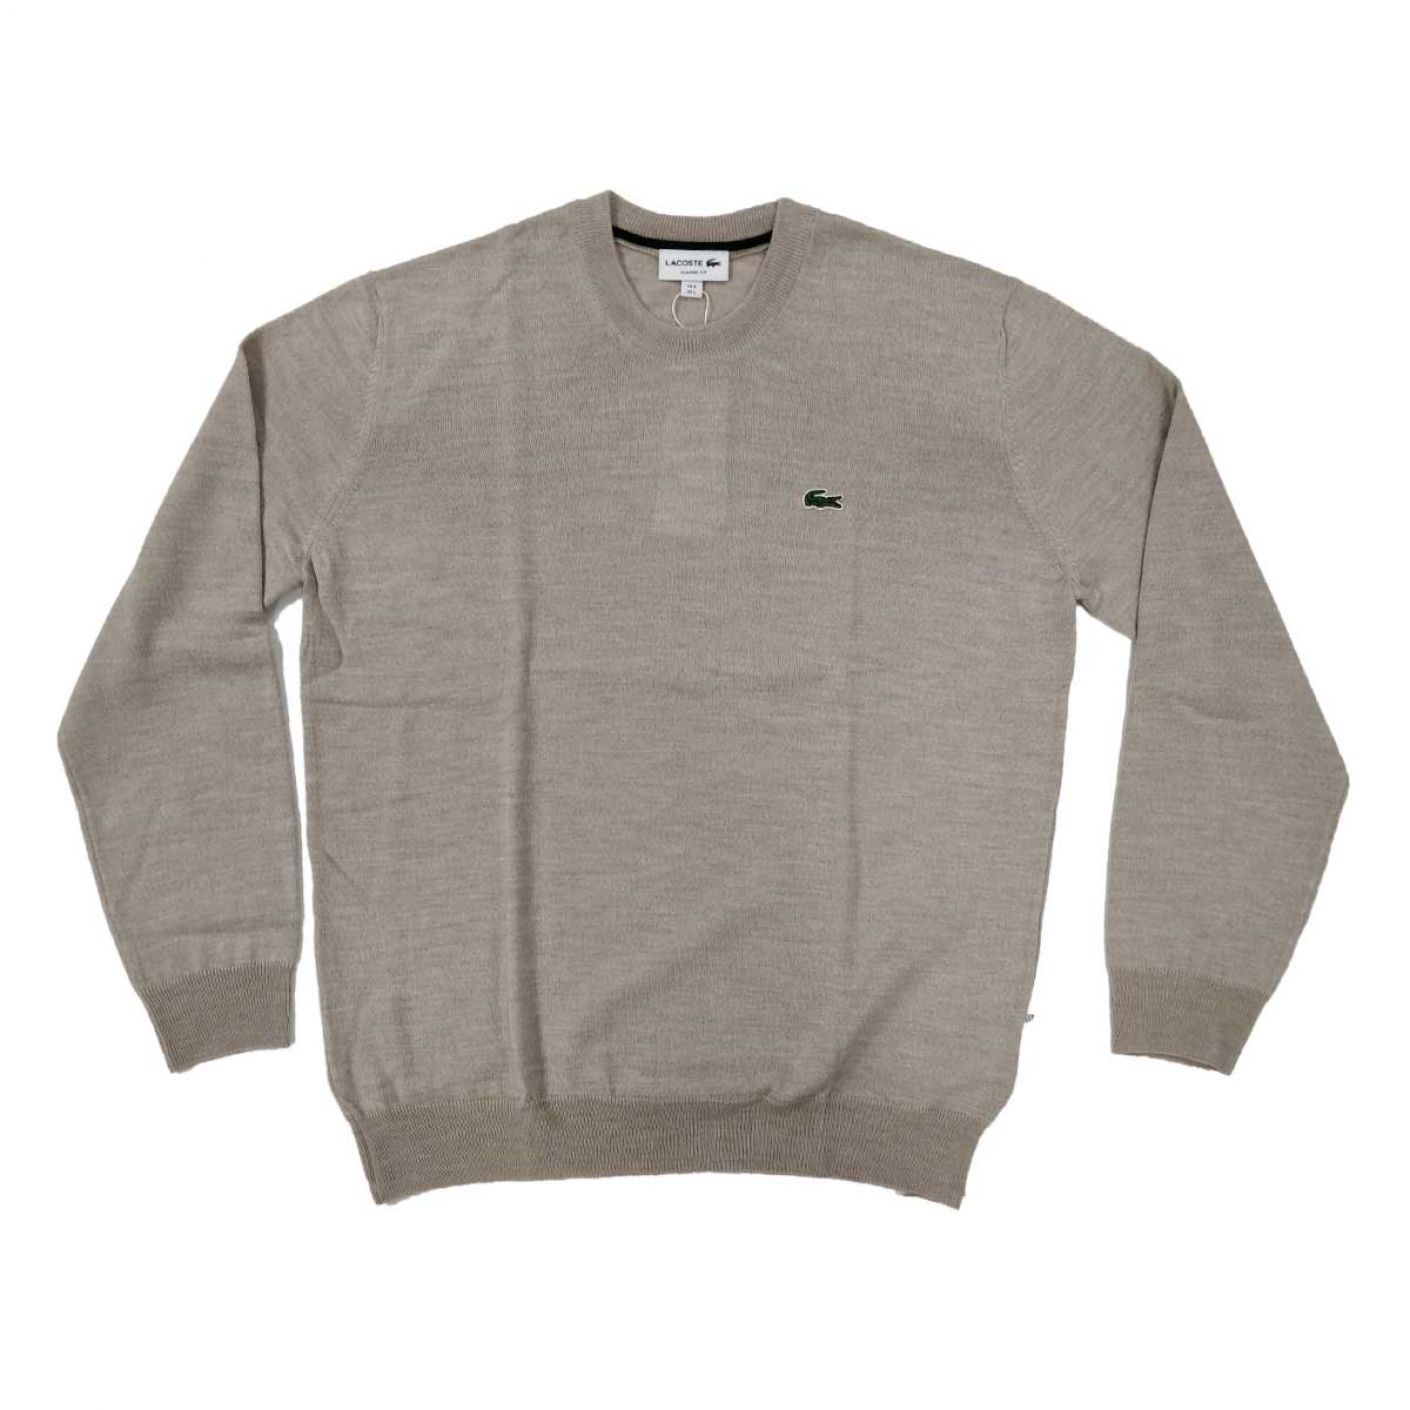 Lacoste Men's Pullover with Round Neck in Sand